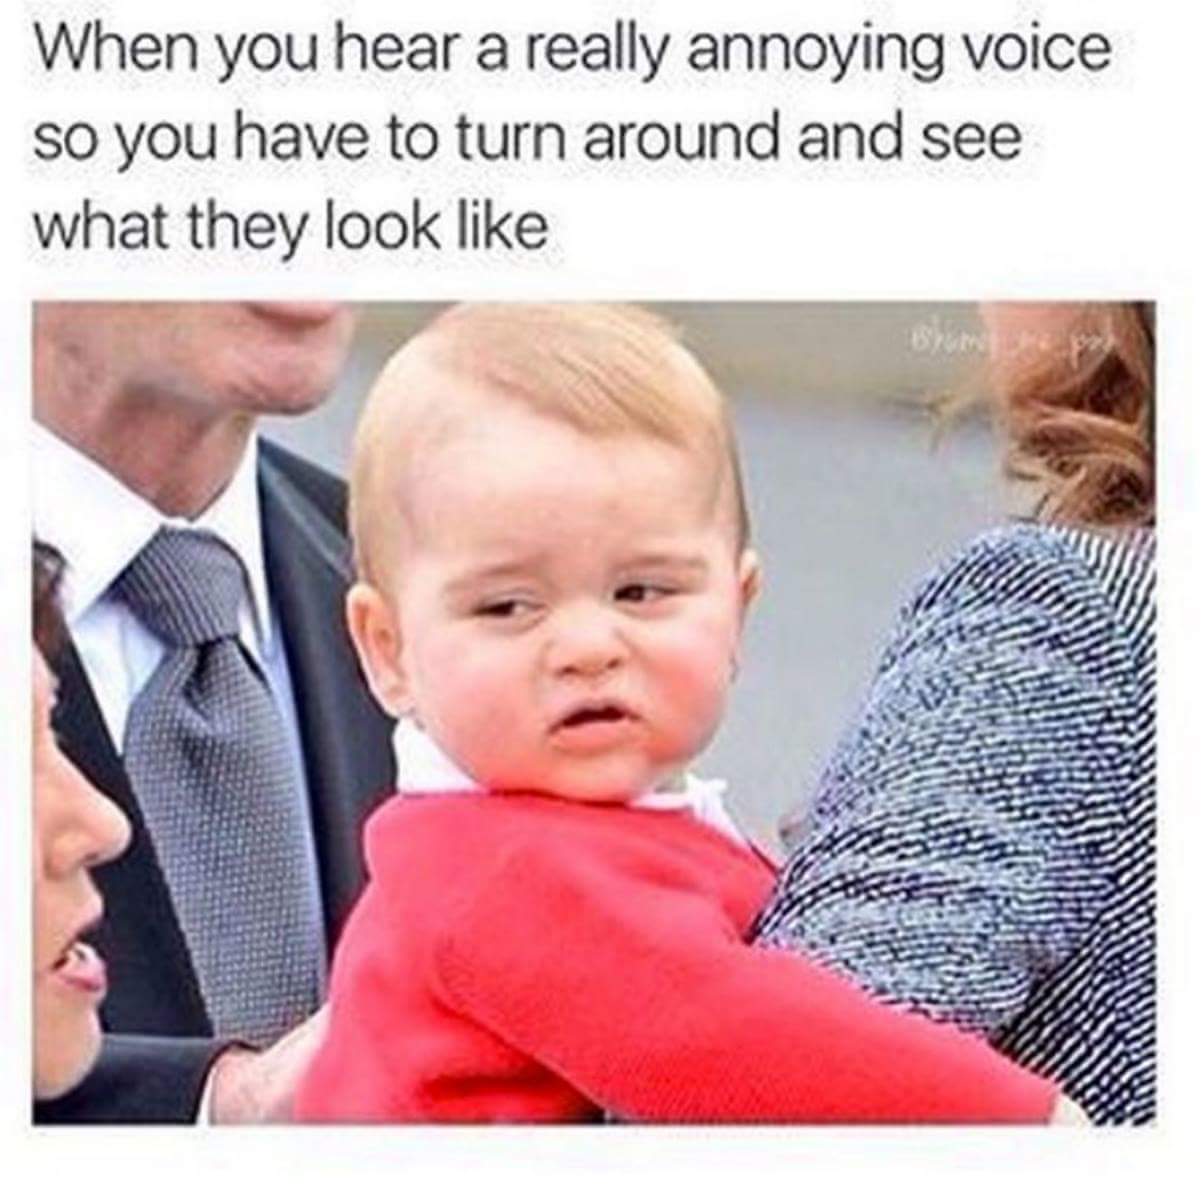 memes - people with annoying voices - When you hear a really annoying voice so you have to turn around and see what they look